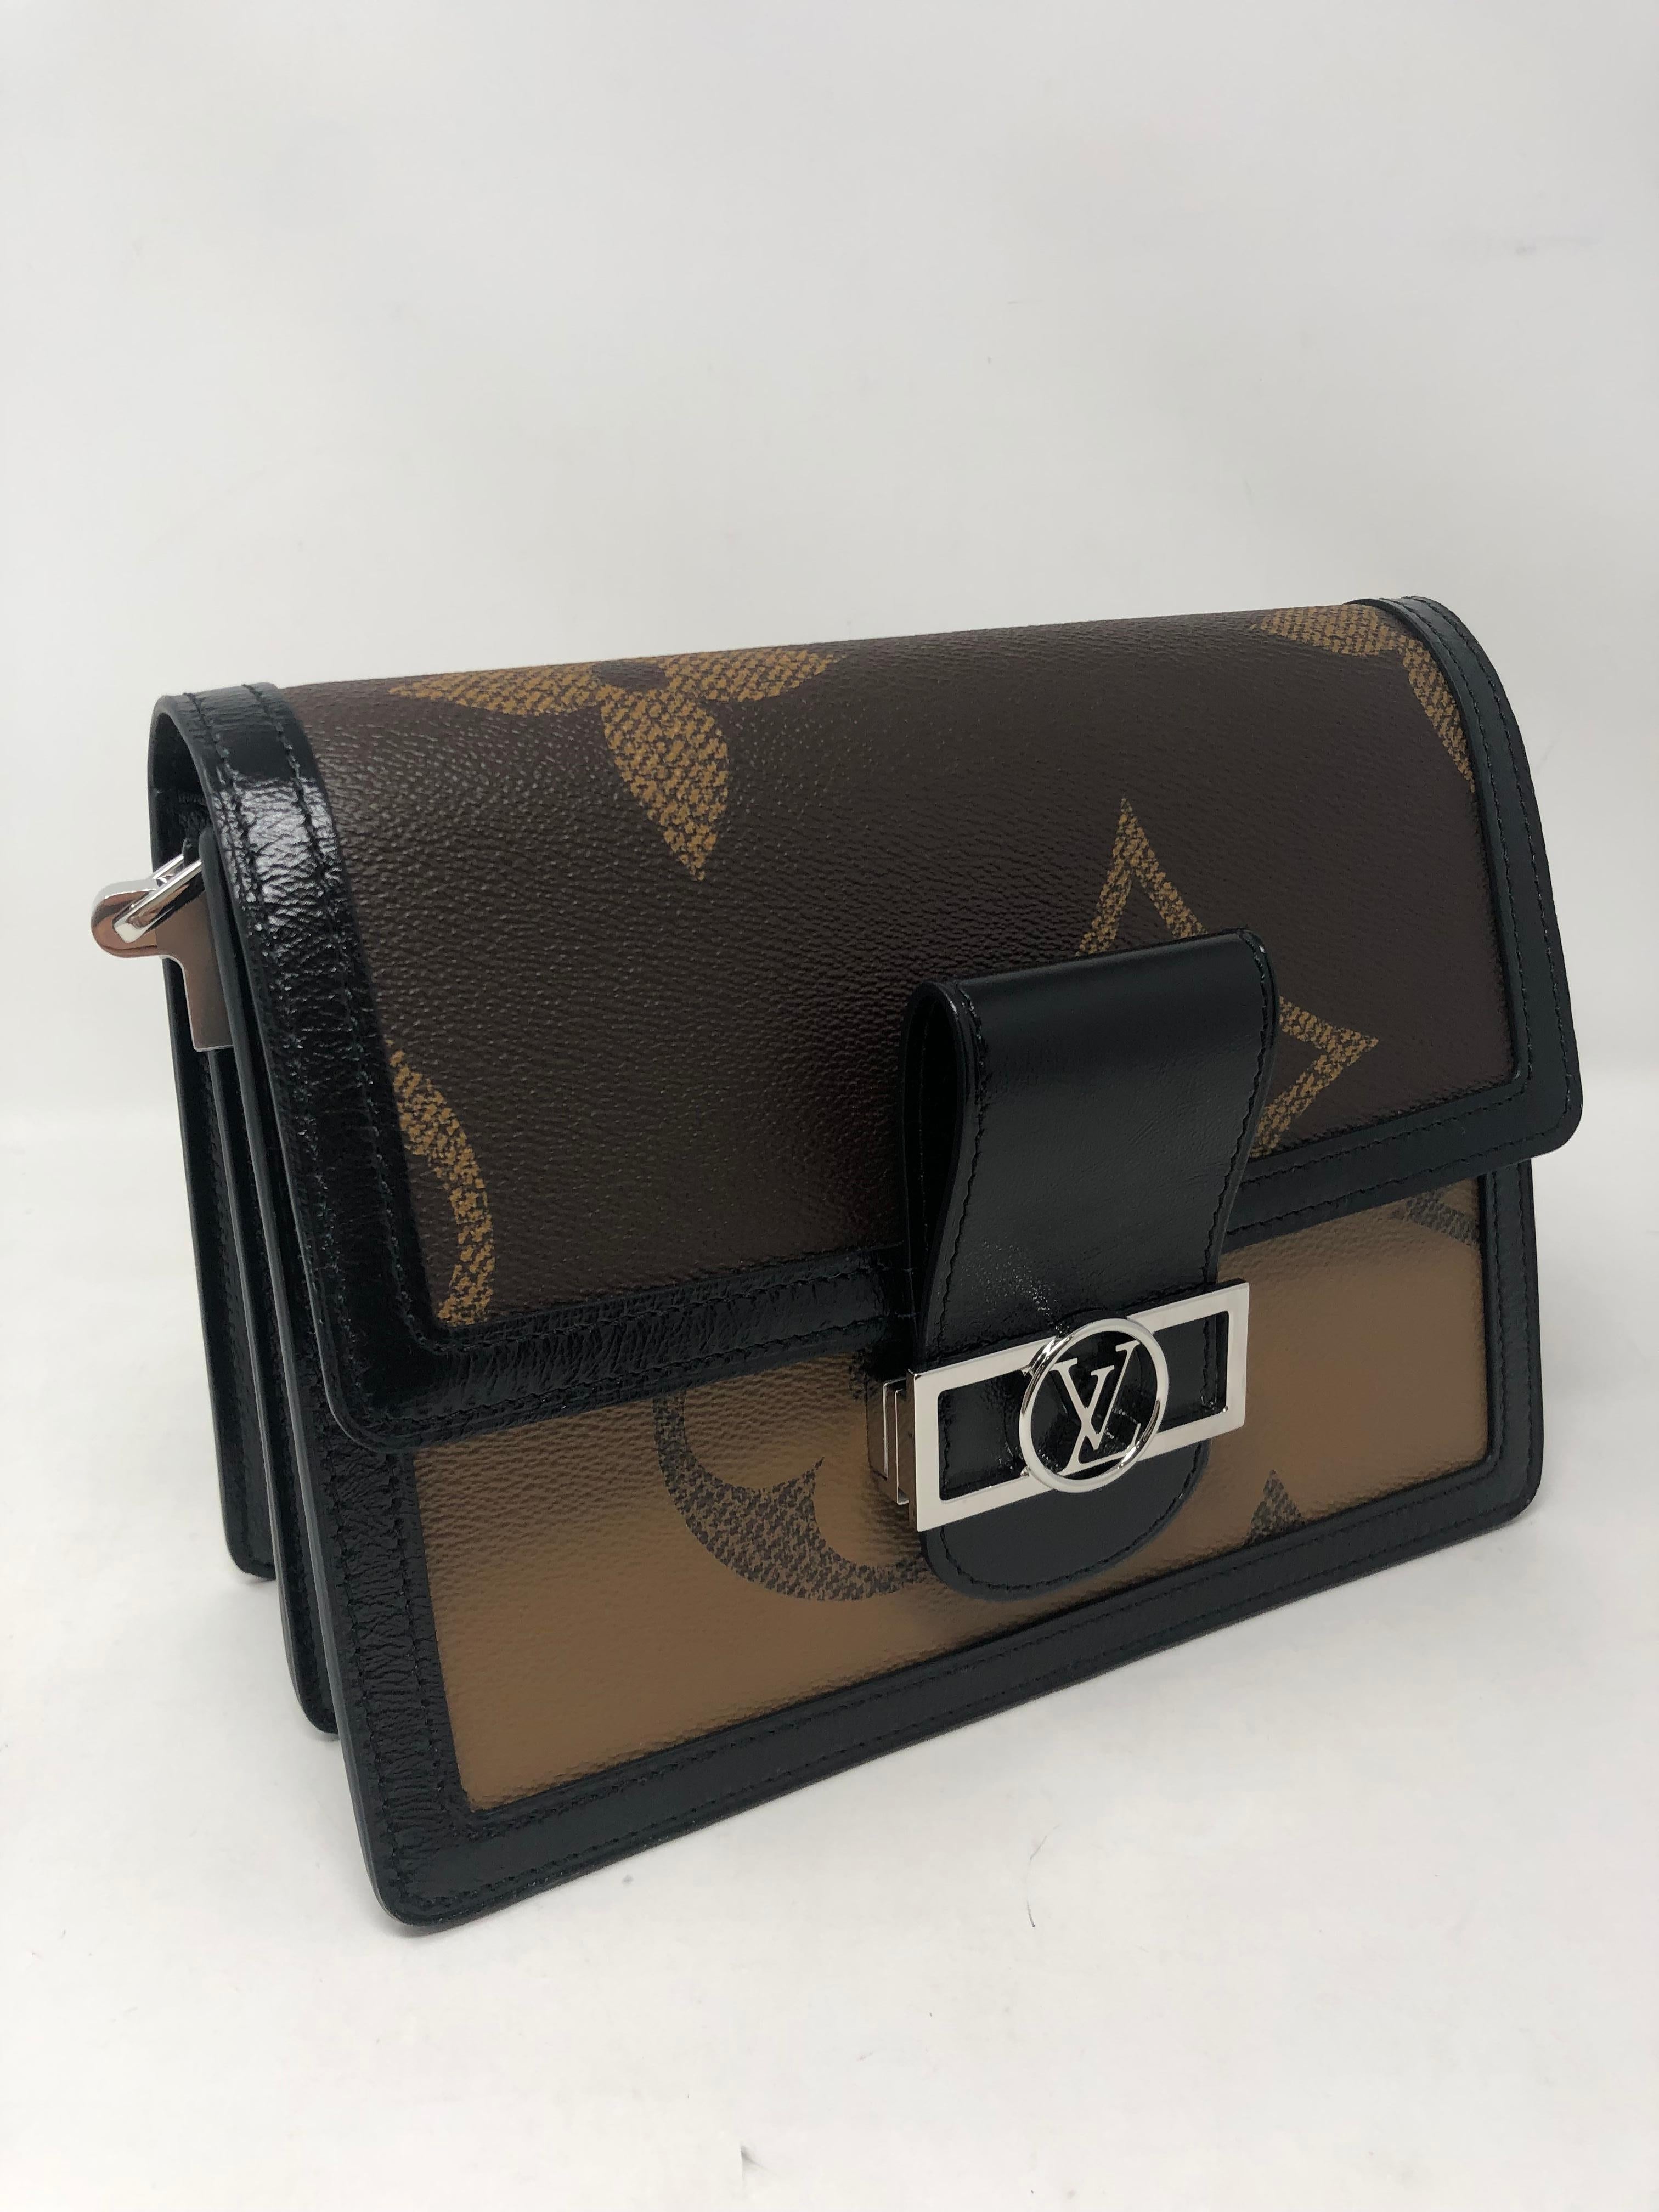 Louis Vuitton Reverse Monogram Giant Dauphine MM Bag. Brand new. Has 2 optional straps, one in black leather and silver chain strap. Gorgeous bag includes LV dust cover and box. Guaranteed authentic. 